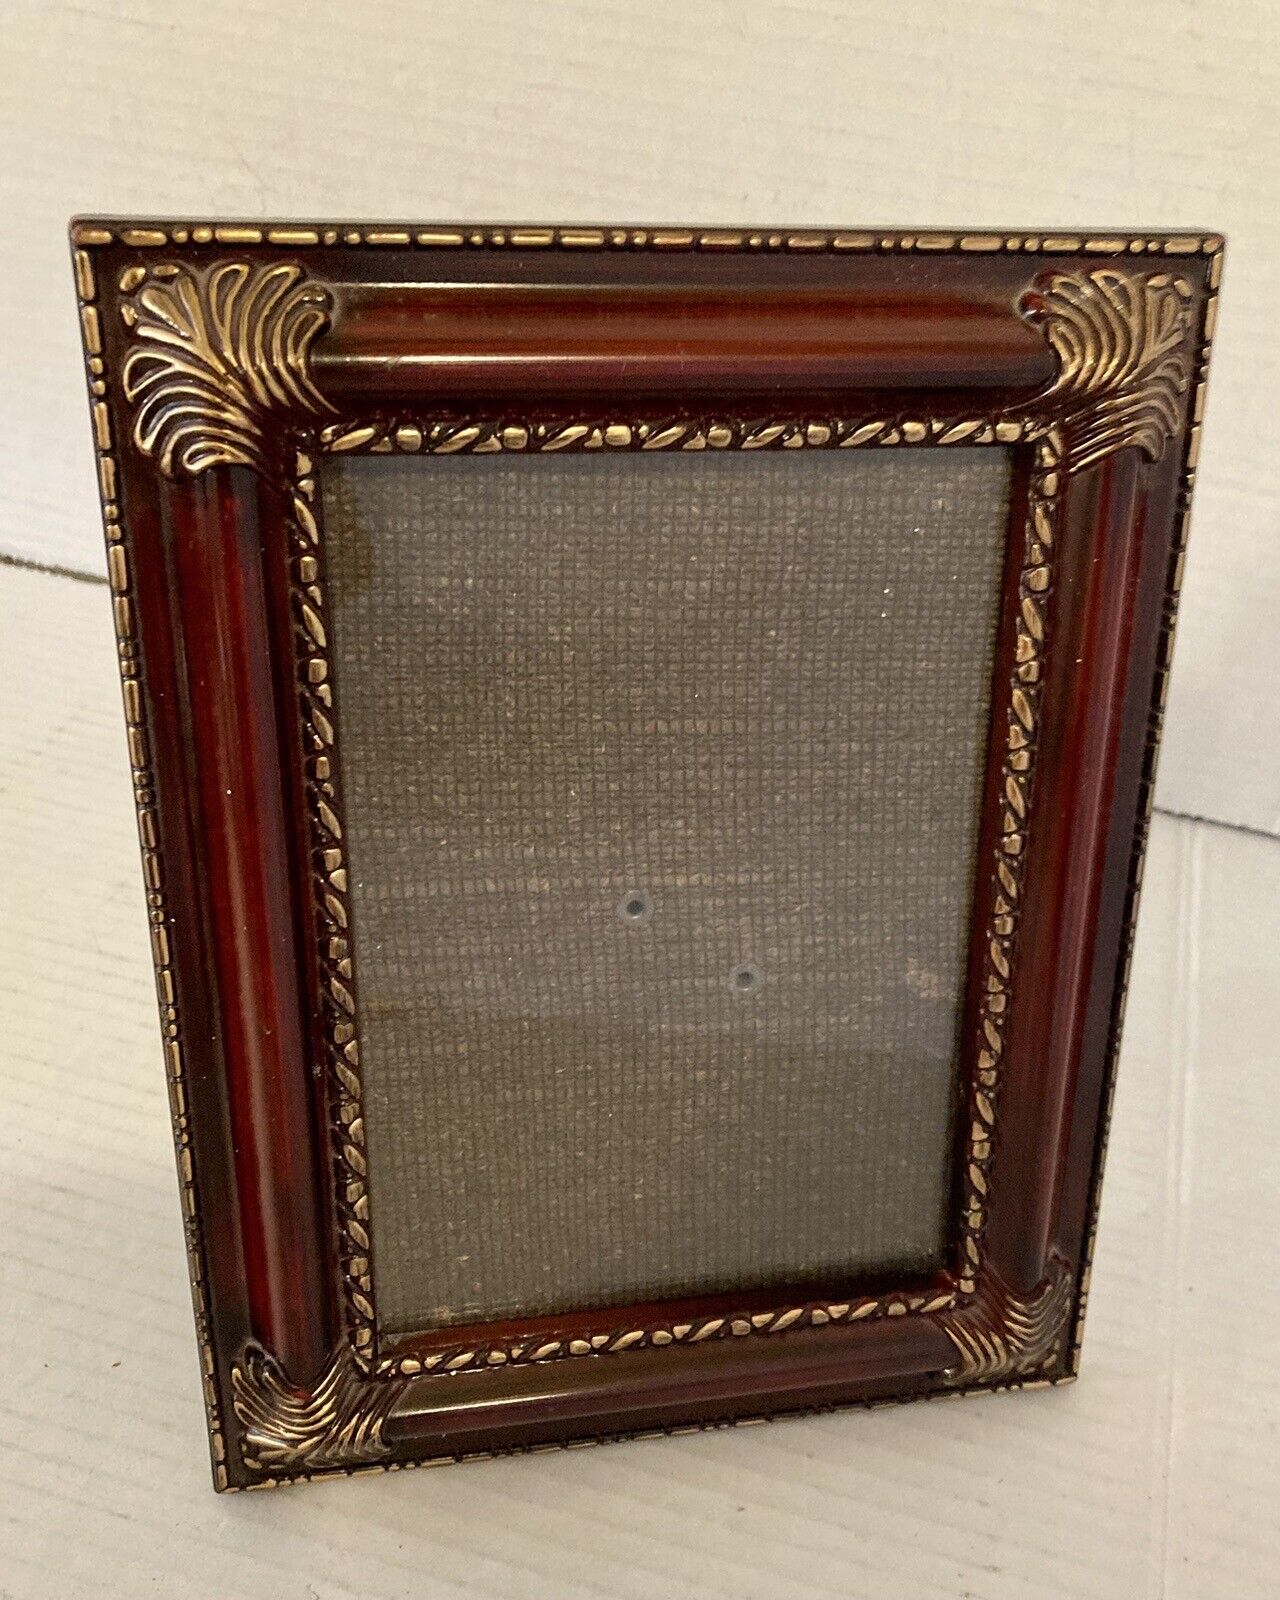 Decorative Vintage Red-Wood Look With Gold Ornate Trim 5 X 7